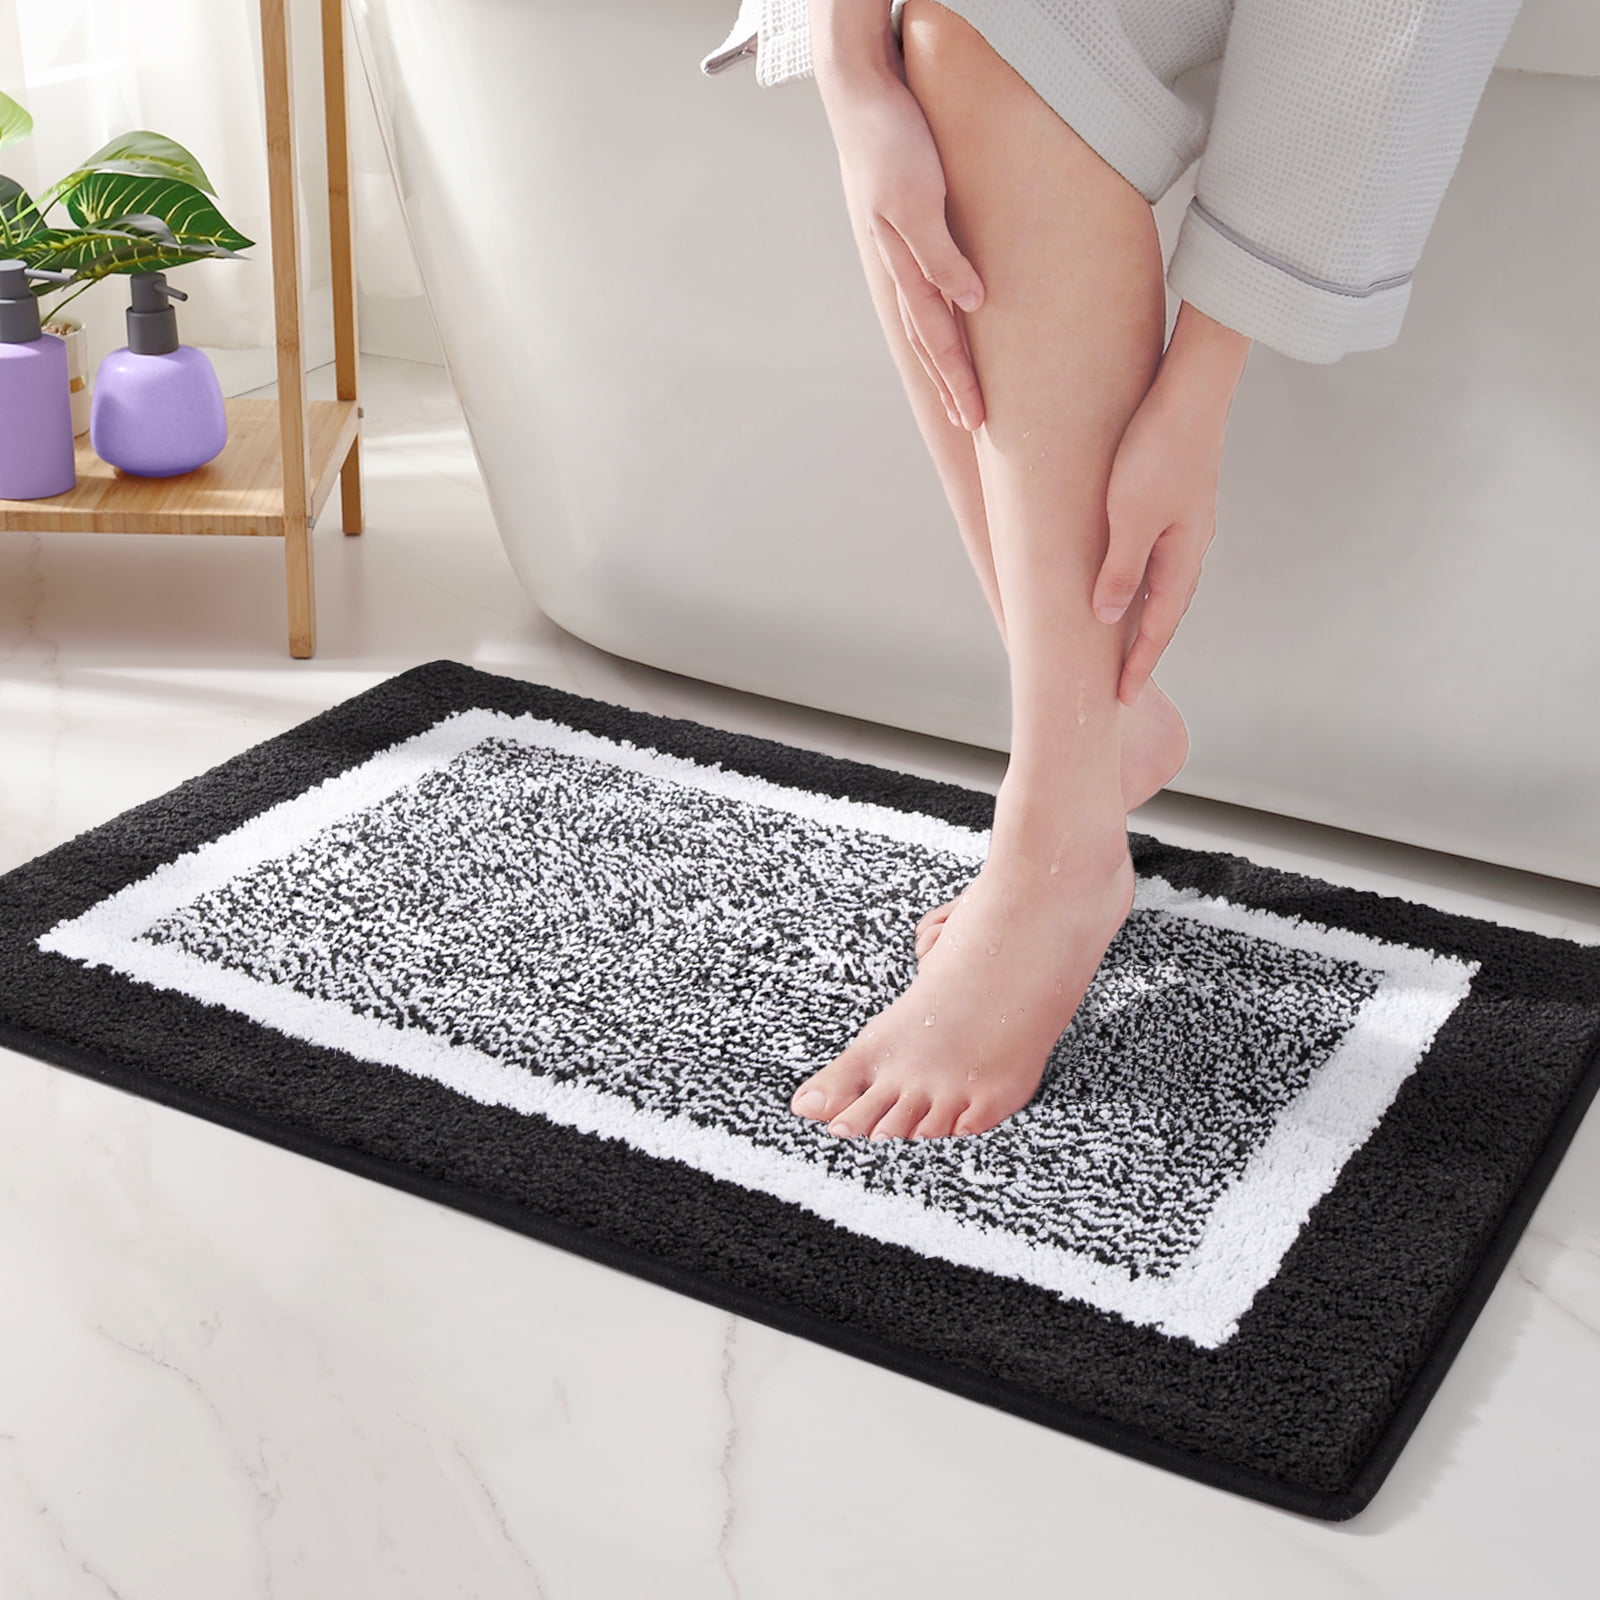 DJSOK Bath Mat Rug,Black White Gray and Gold Marble Non-Slip Super Absorbent Quick Drying Bathroom Floor Mat,Fit Under Door,Easy to Clean,Shower Rug for